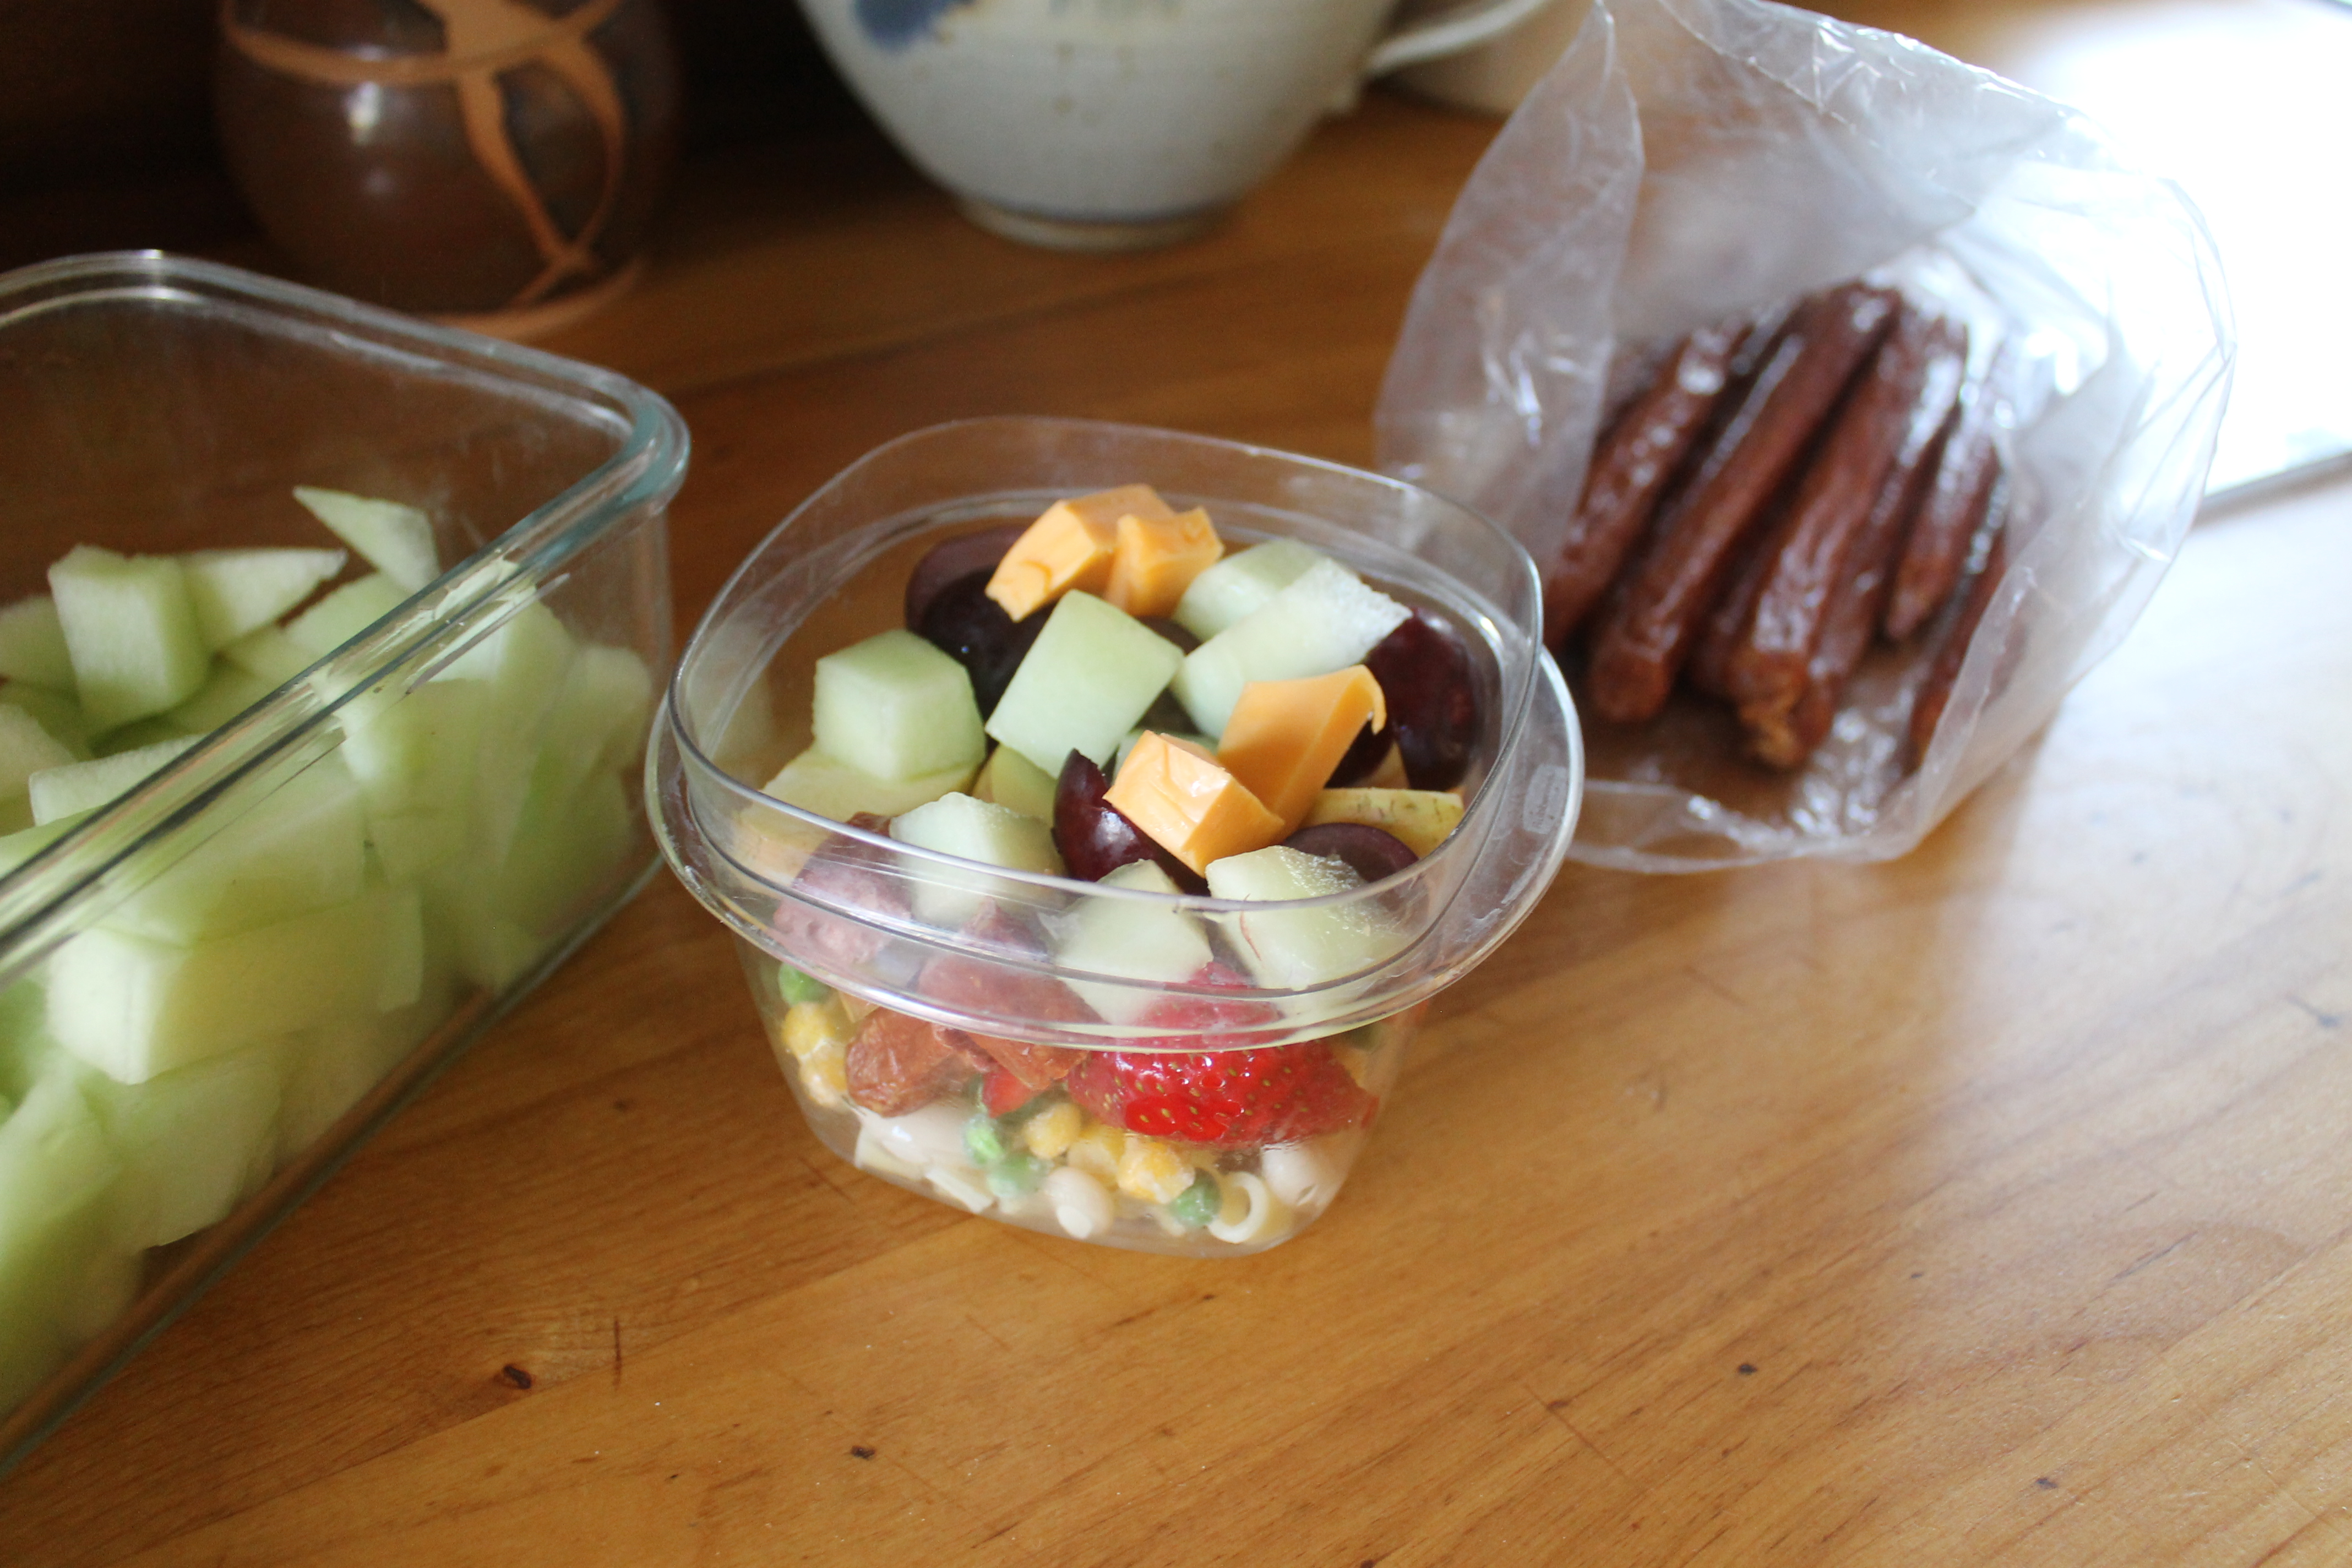 Healthy Kid's Snack Packs To Go